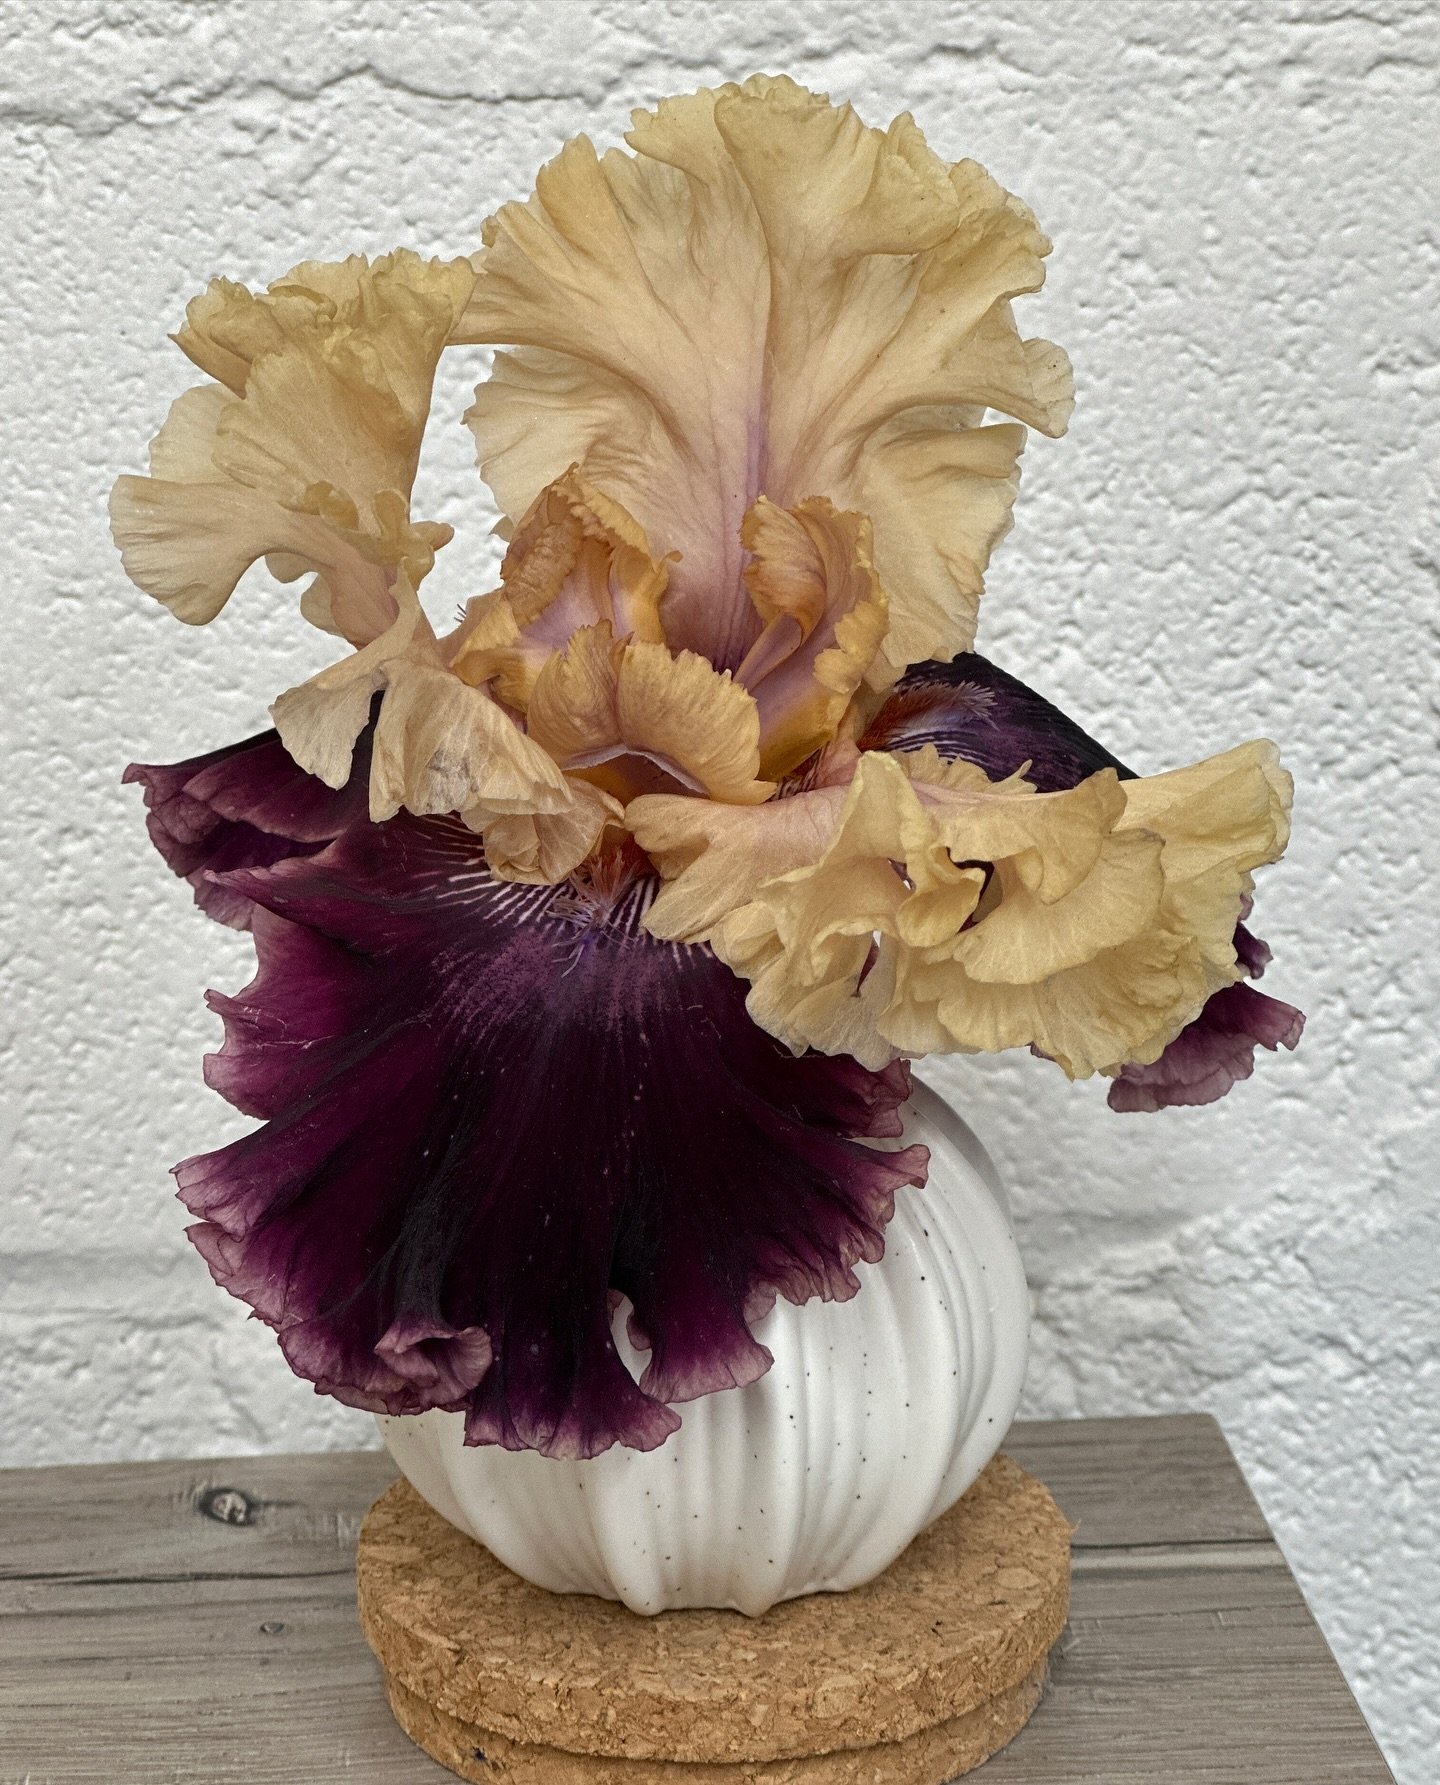 The picture doesn&rsquo;t do it justice, but this is one of my new Iris from @schreinersgardens that I bought last year.  The stem was so big, that when I went to stake it I broke off the top flower.  Of course I couldn&rsquo;t let it go to waste, so